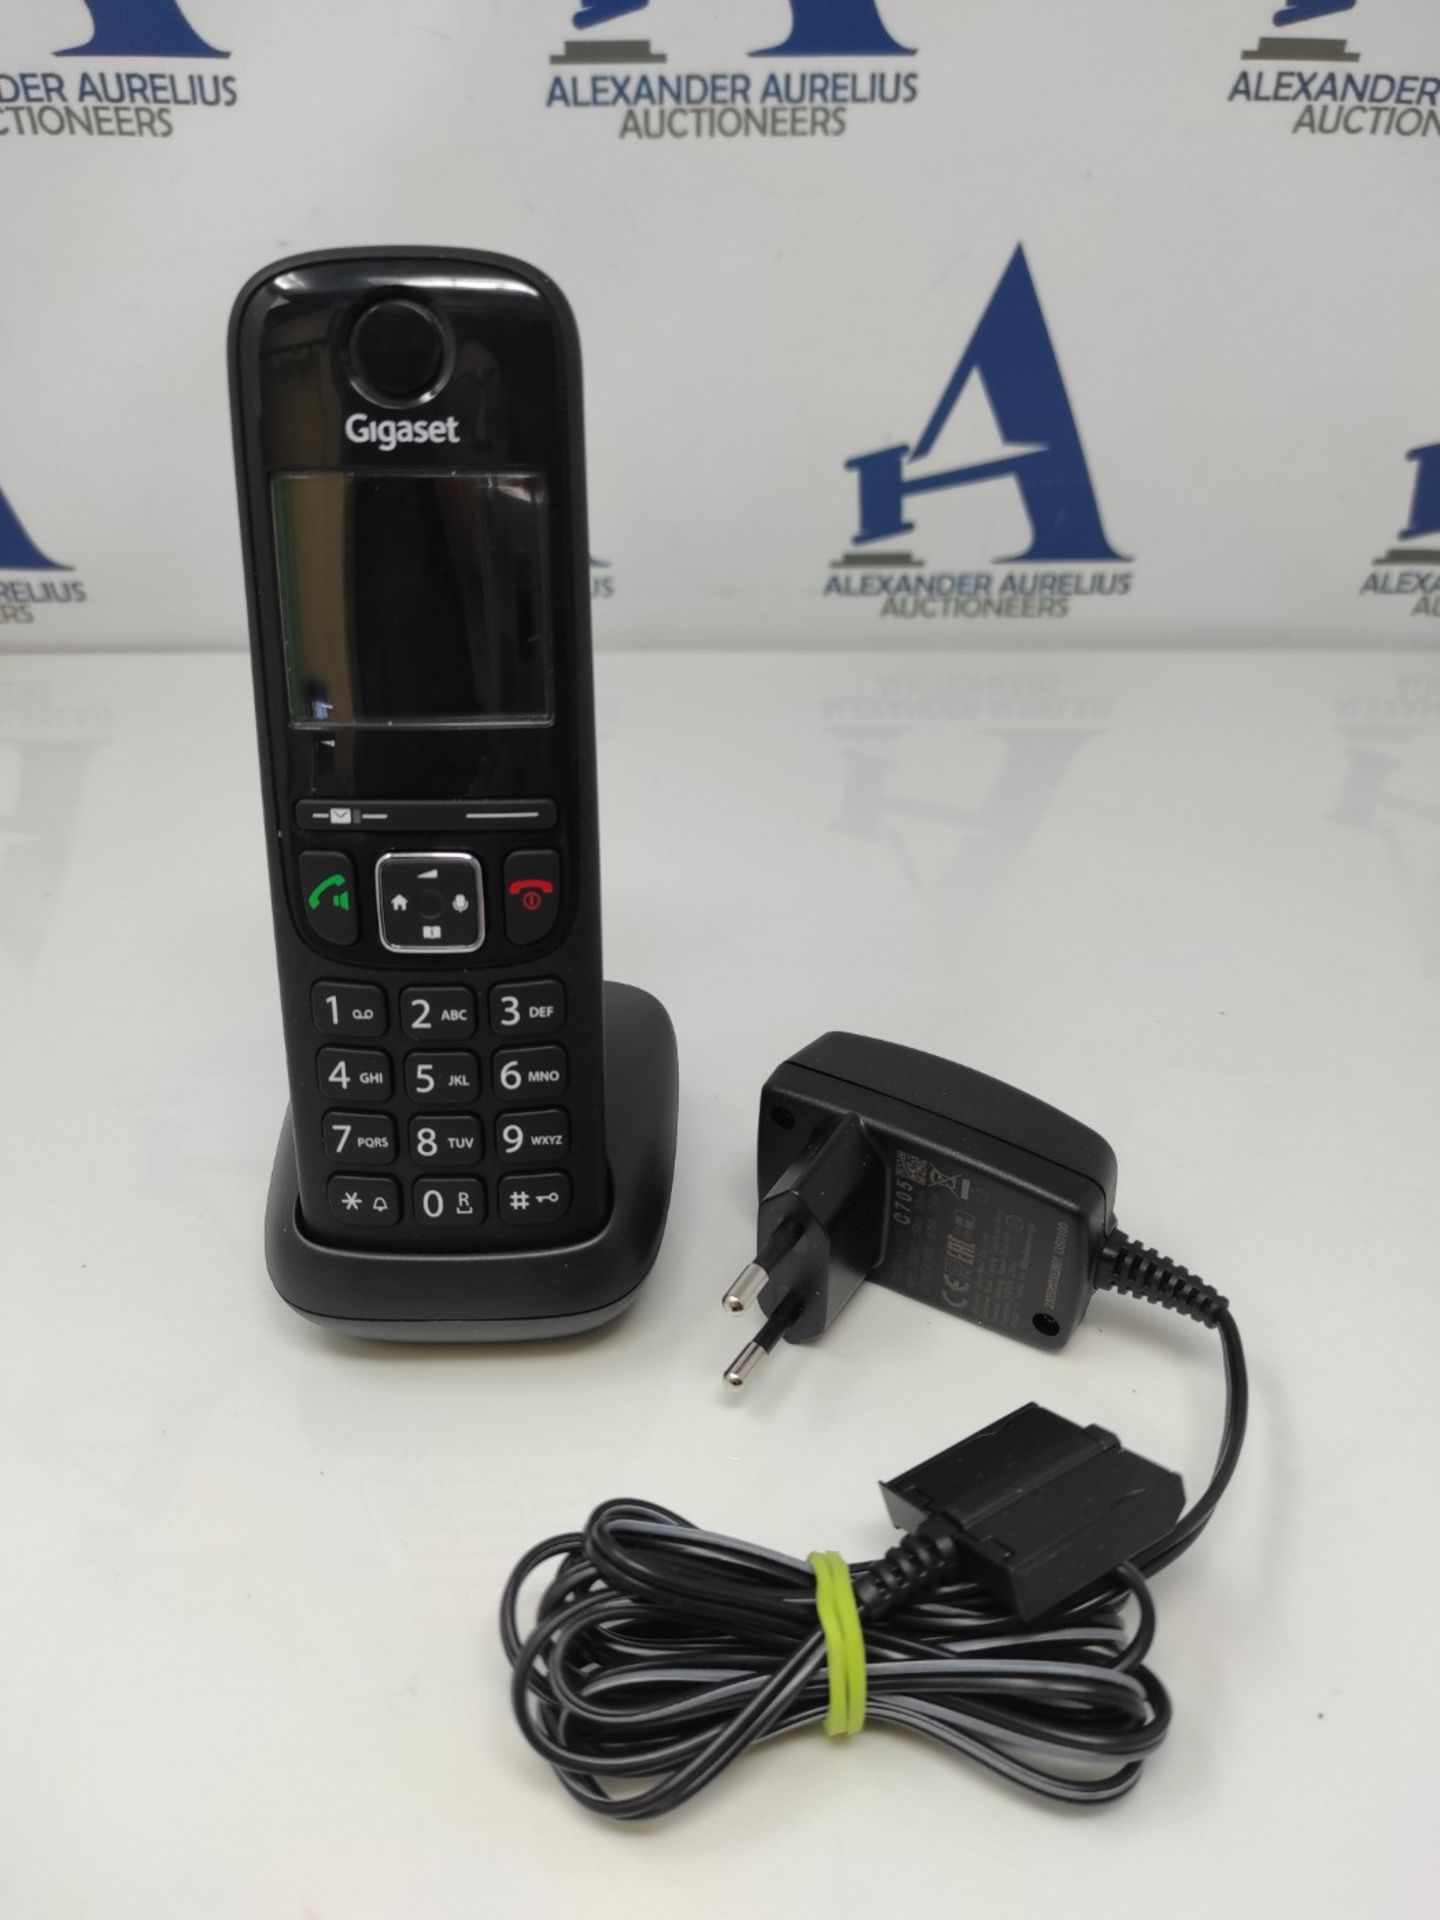 Gigaset AS690HX - DECT handset with charging cradle - high-quality cordless phone for - Image 2 of 2